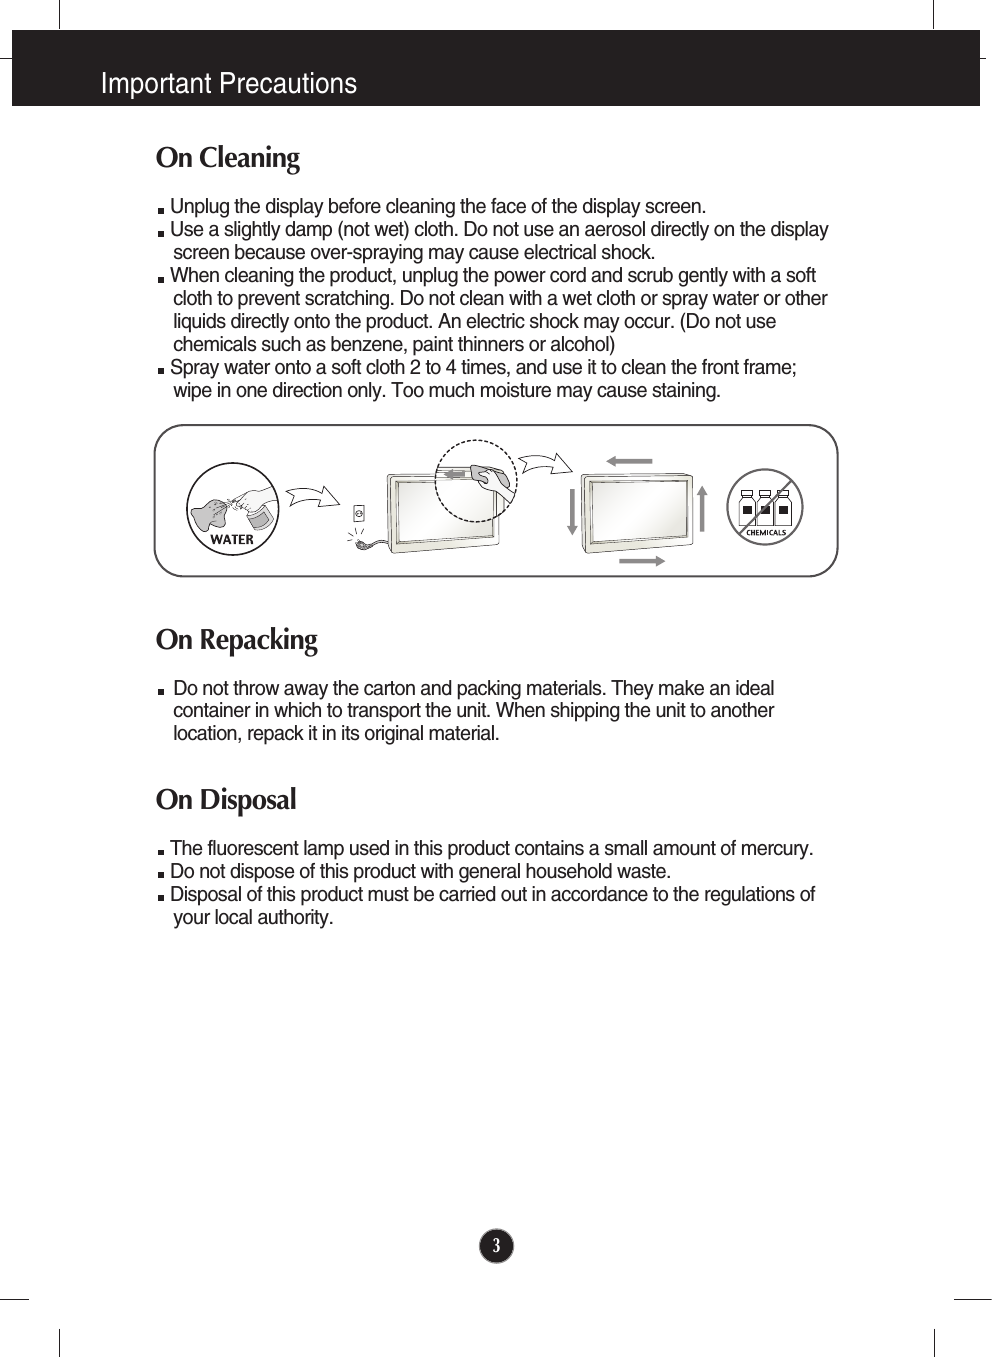 Important Precautions3On CleaningUnplug the display before cleaning the face of the display screen.Use a slightly damp (not wet) cloth. Do not use an aerosol directly on the displayscreen because over-spraying may cause electrical shock.When cleaning the product, unplug the power cord and scrub gently with a softcloth to prevent scratching. Do not clean with a wet cloth or spray water or otherliquids directly onto the product. An electric shock may occur. (Do not usechemicals such as benzene, paint thinners or alcohol) Spray water onto a soft cloth 2 to 4 times, and use it to clean the front frame;wipe in one direction only. Too much moisture may cause staining.  On RepackingDo not throw away the carton and packing materials. They make an idealcontainer in which to transport the unit. When shipping the unit to anotherlocation, repack it in its original material.On DisposalThe fluorescent lamp used in this product contains a small amount of mercury.Do not dispose of this product with general household waste.Disposal of this product must be carried out in accordance to the regulations ofyour local authority.